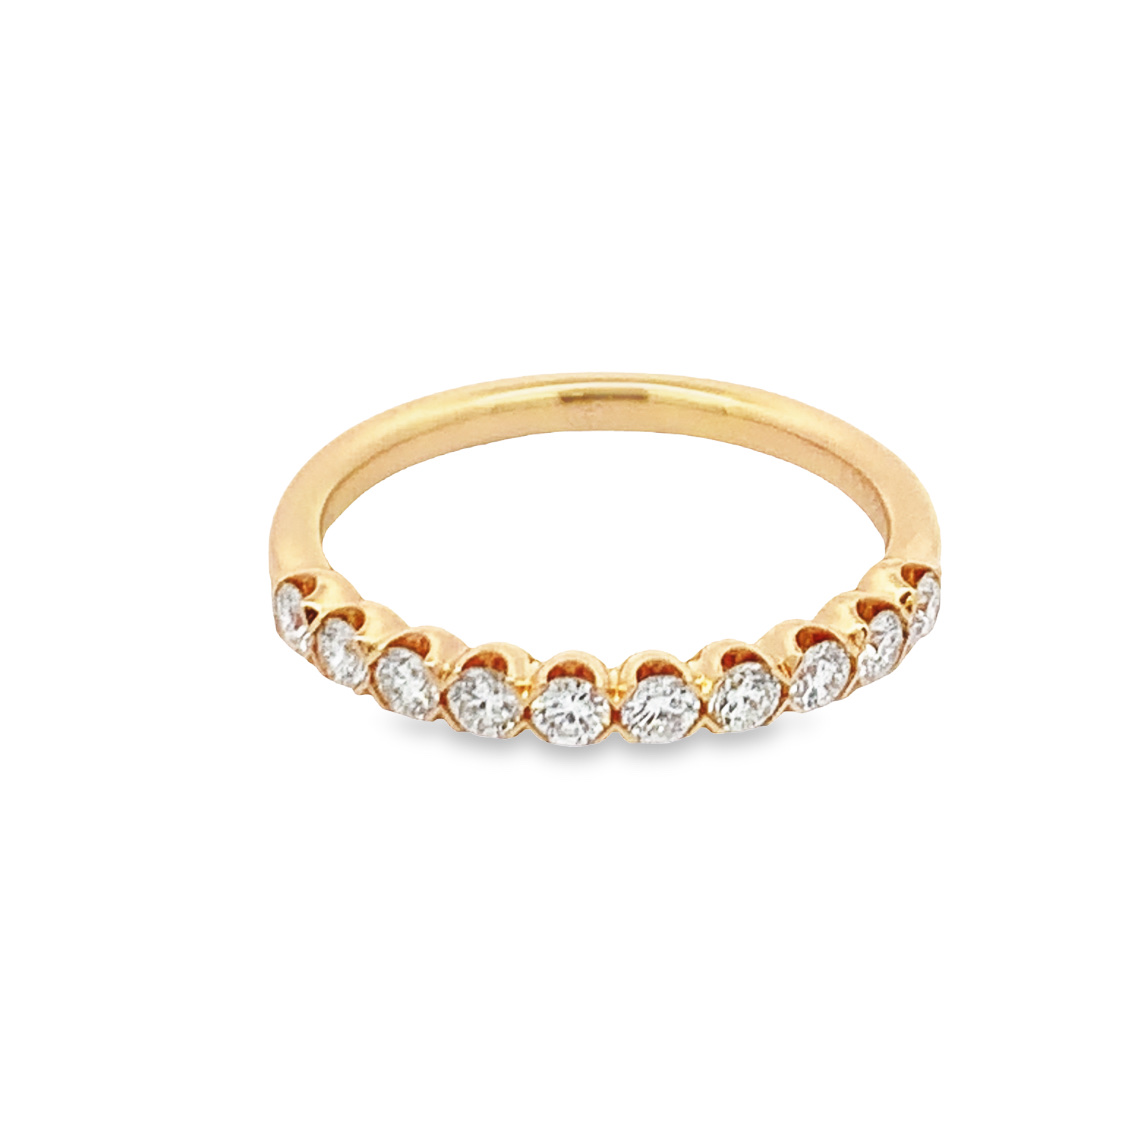 Christopher Designs 14K Yellow Gold Half Anniversary Band with 10 Round Brilliant Cut Diamonds 0.45 TCW G SI12